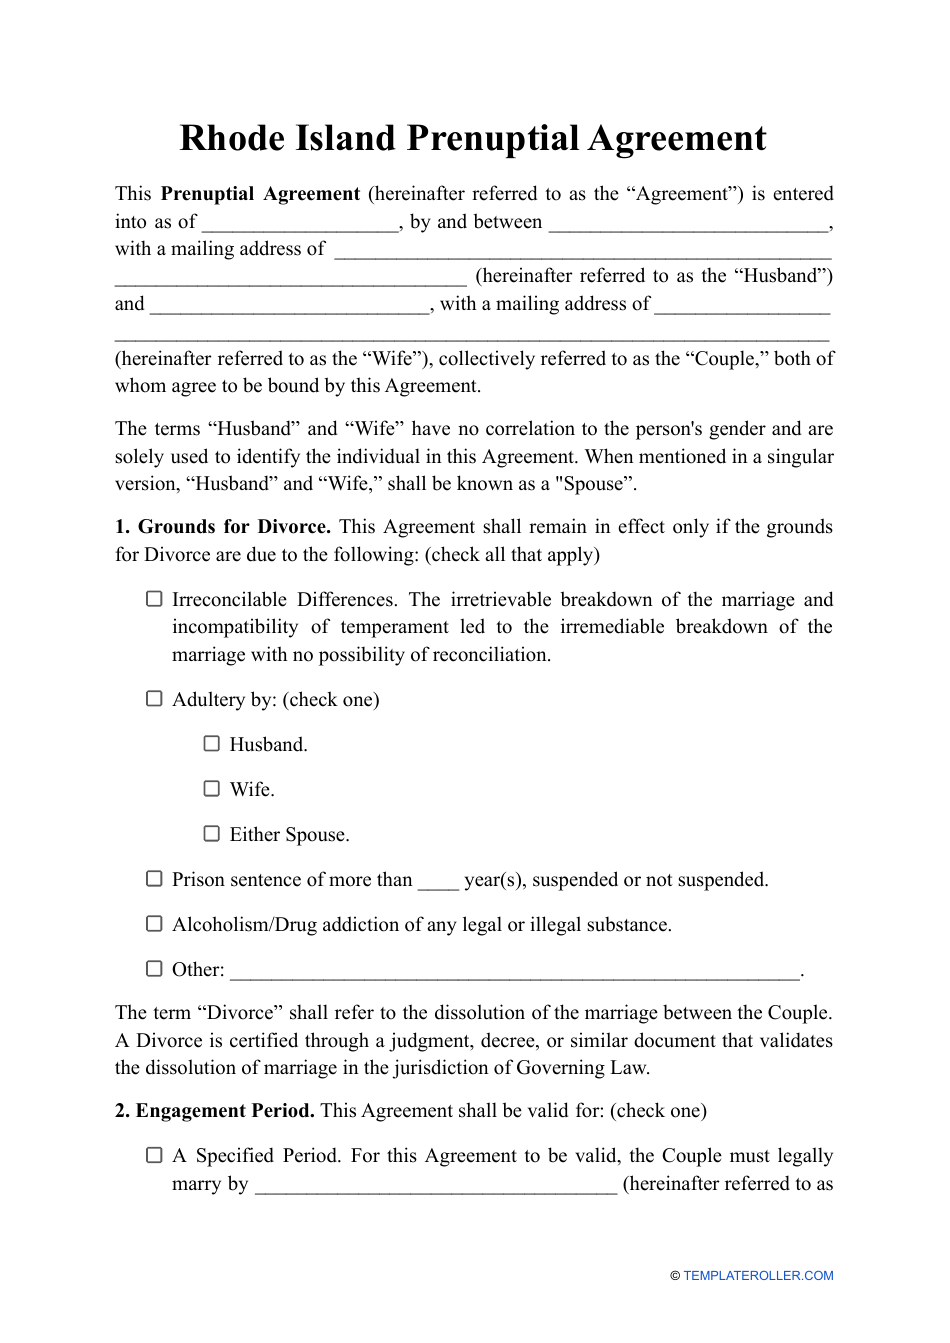 Prenuptial Agreement Template - Rhode Island, Page 1